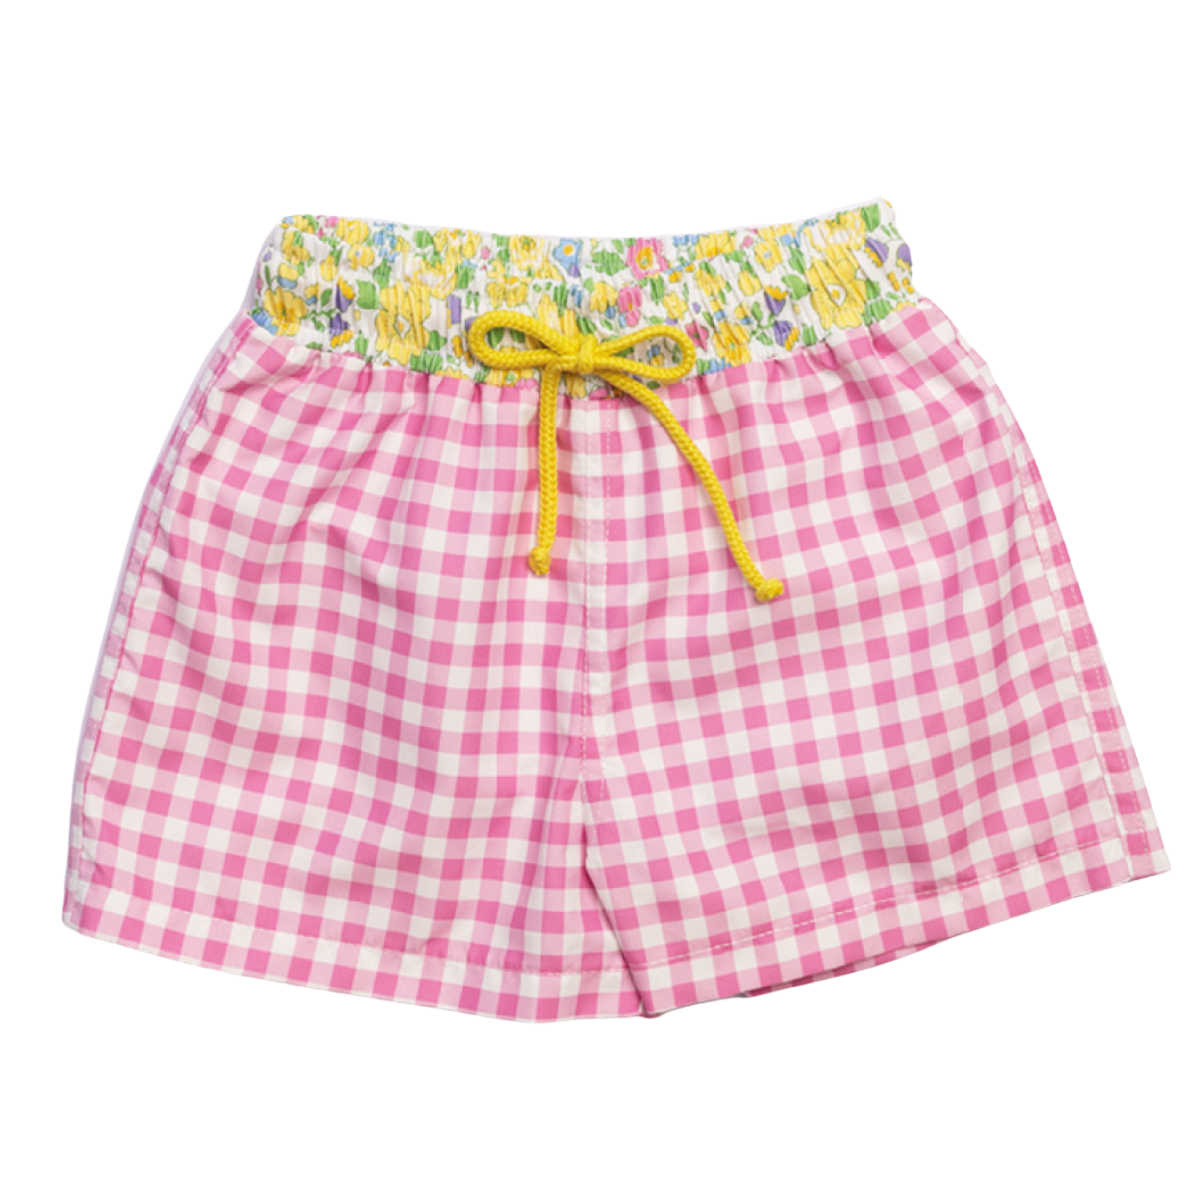 Pink gingham boys swim shorts with yellow floral waistband with yellow drawstring. 